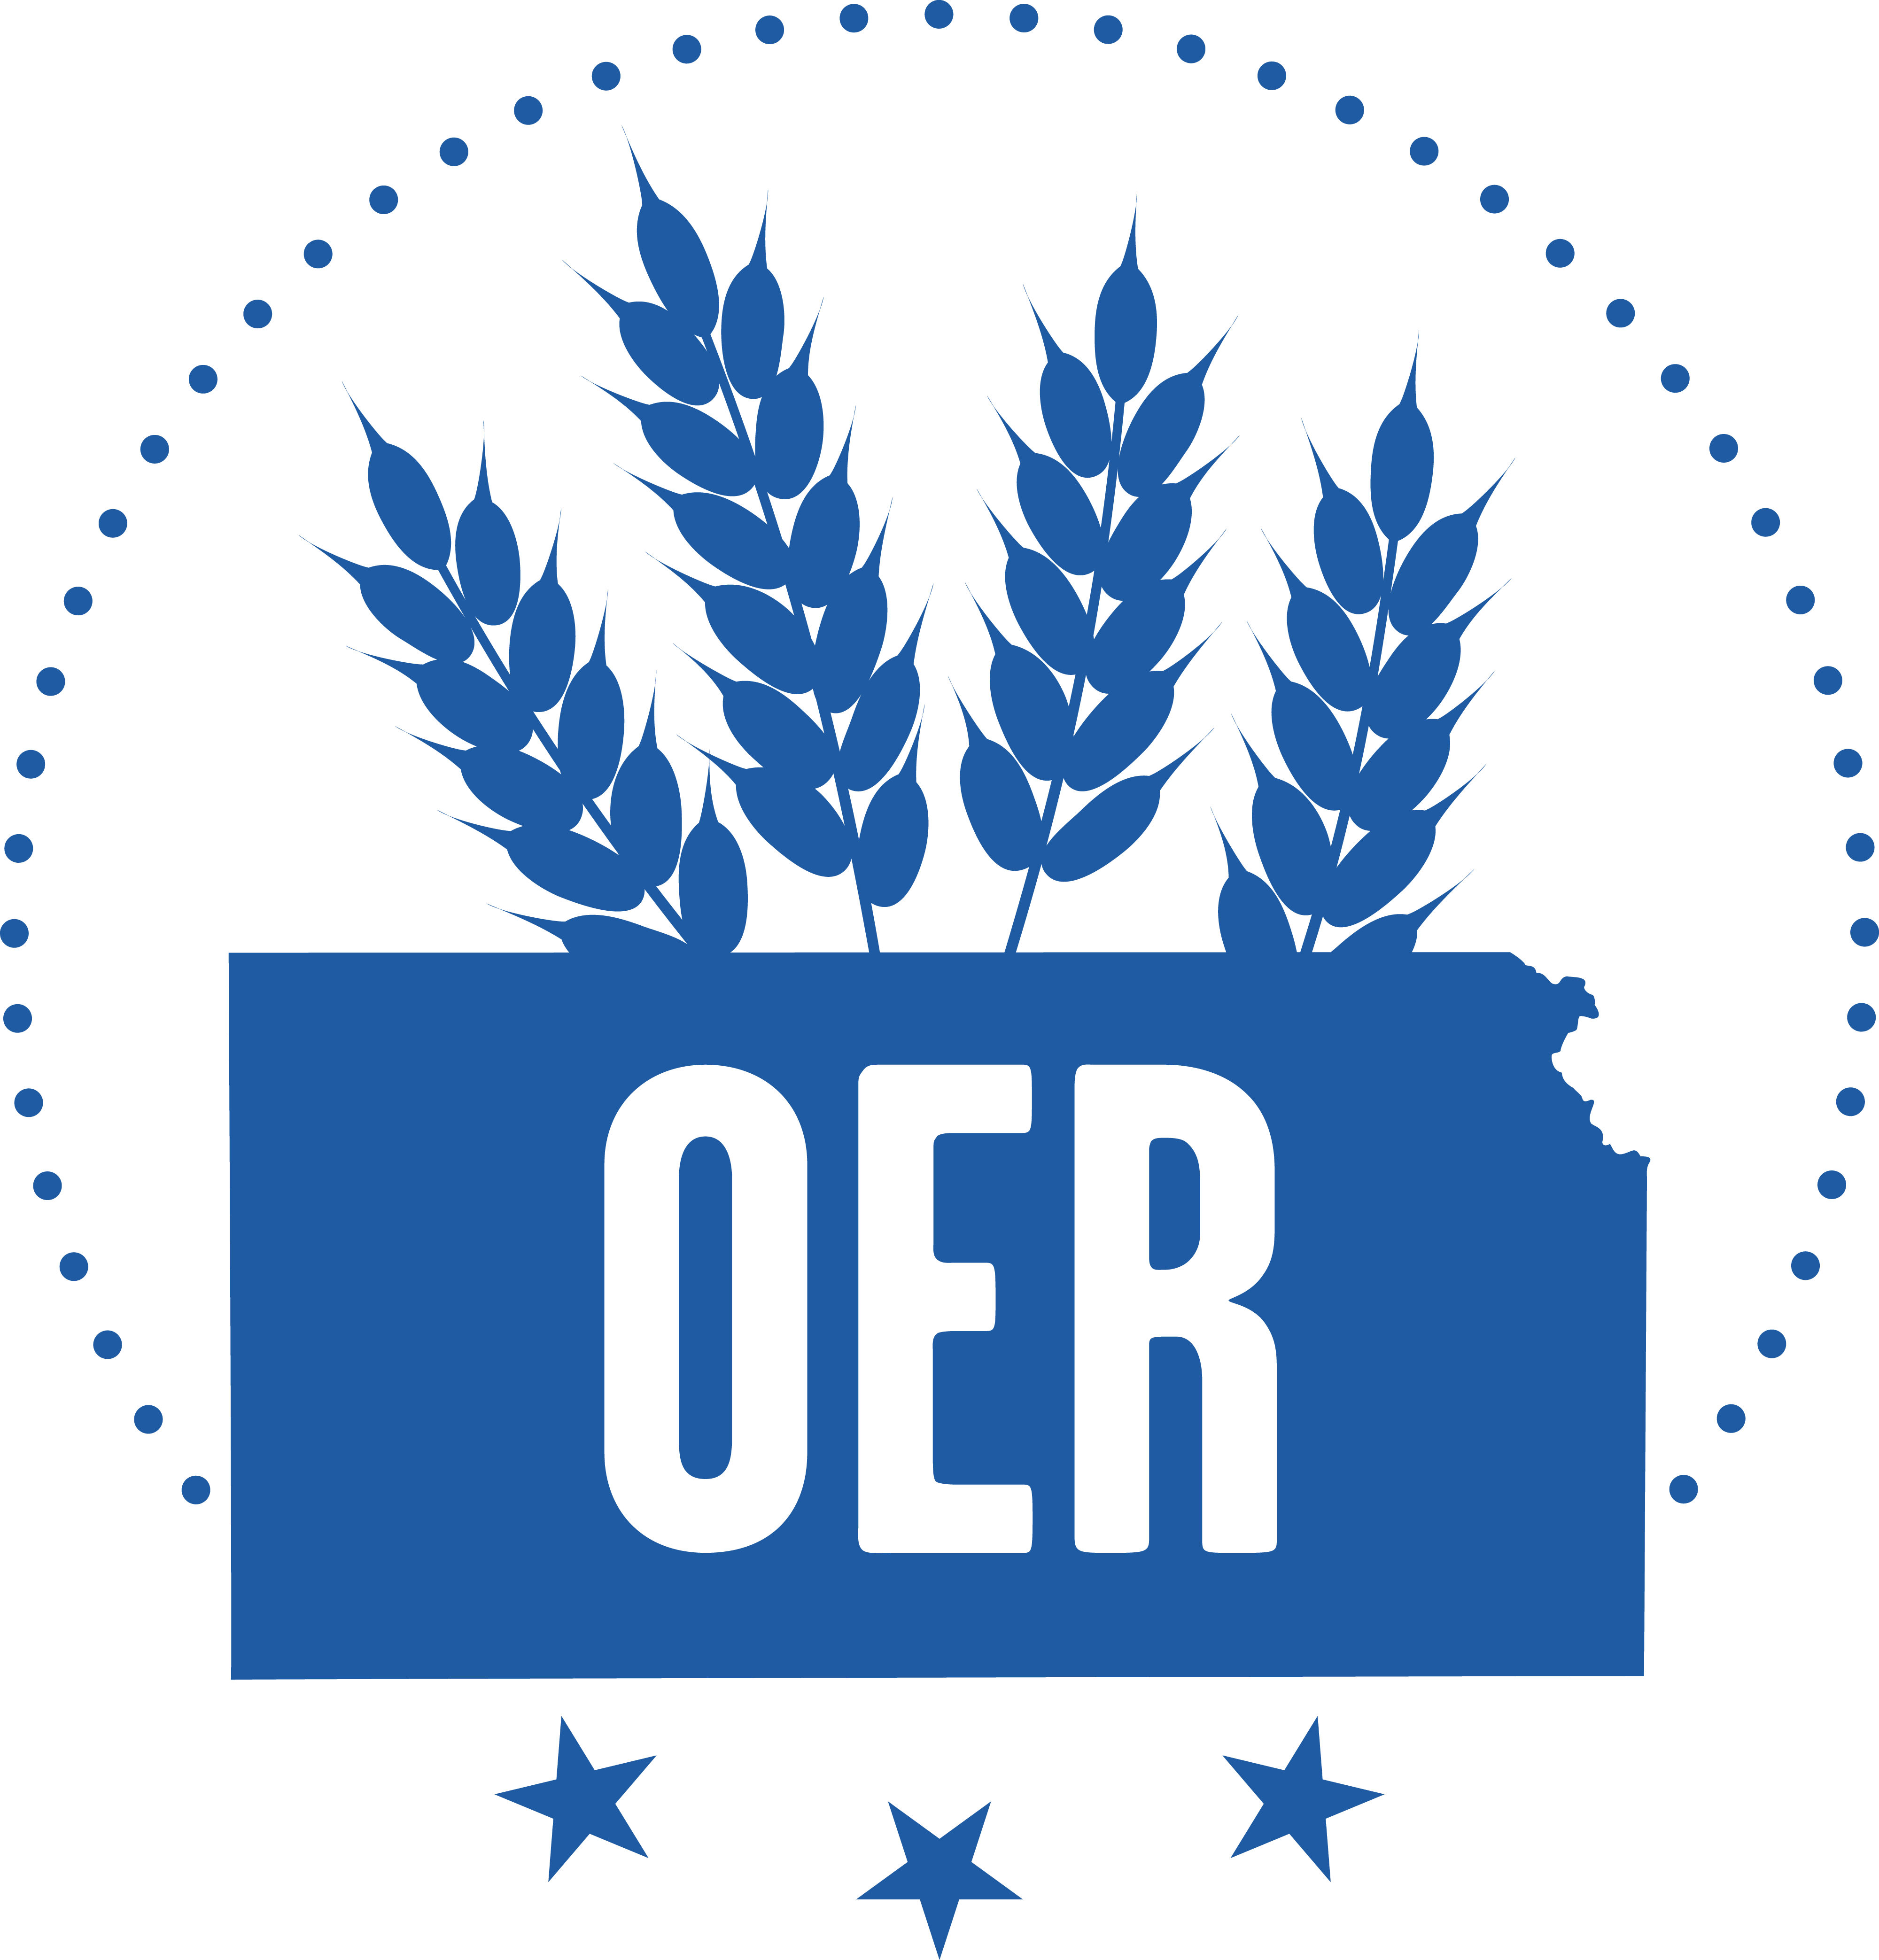 image of the state of Kansas with "OER" in the middle.